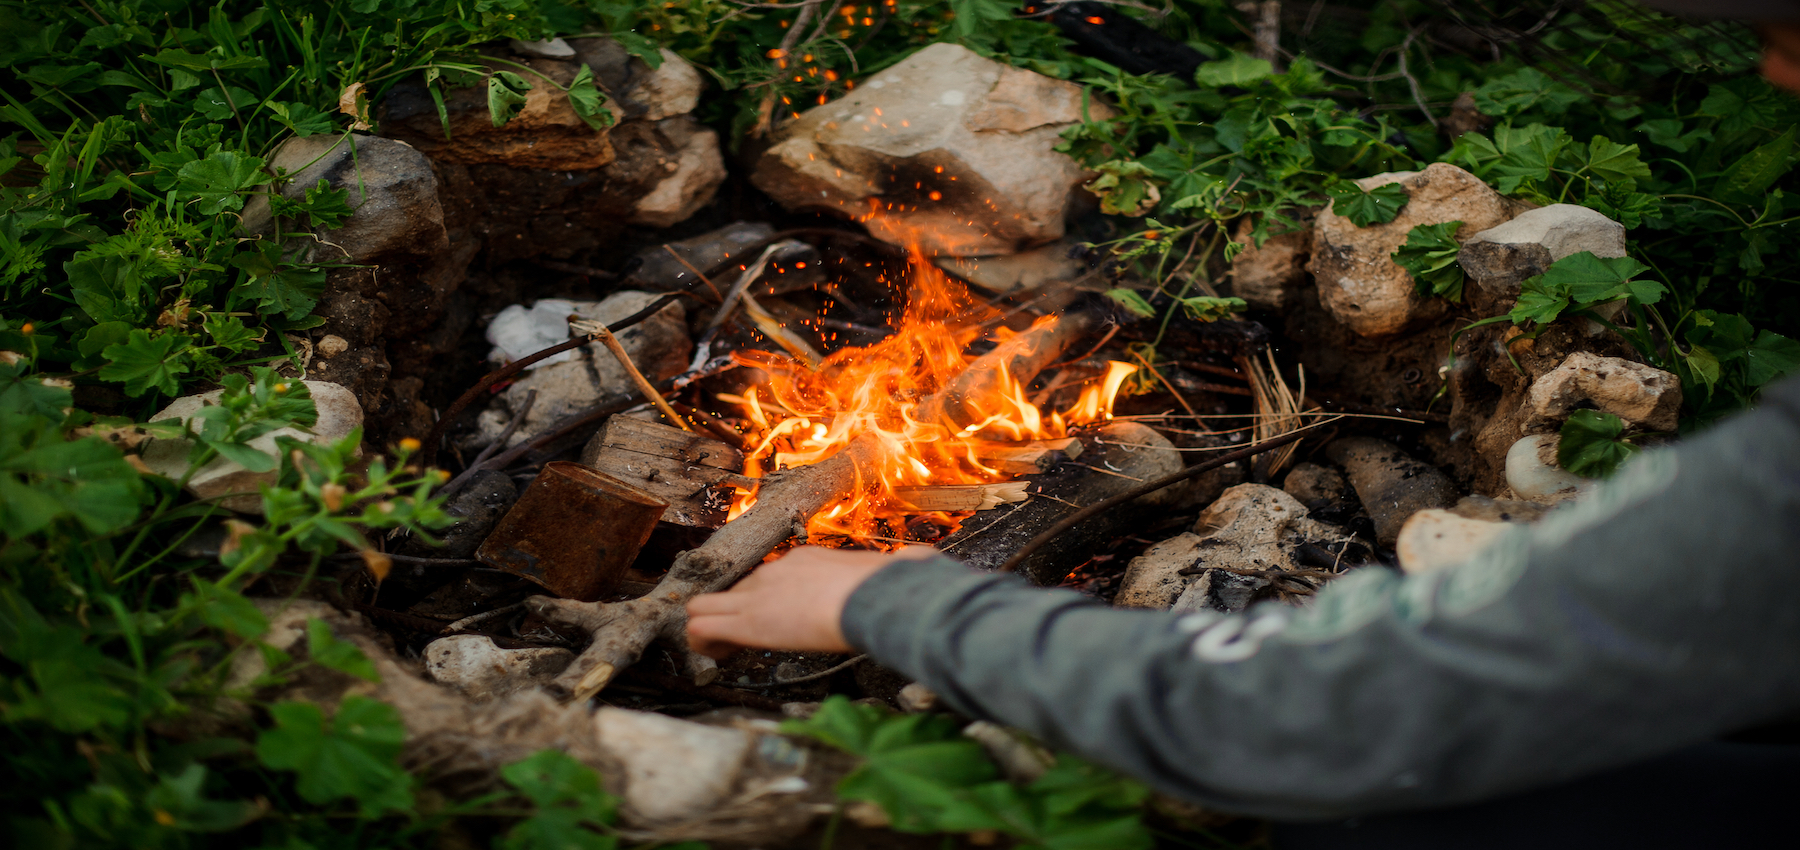 How to start a campfire